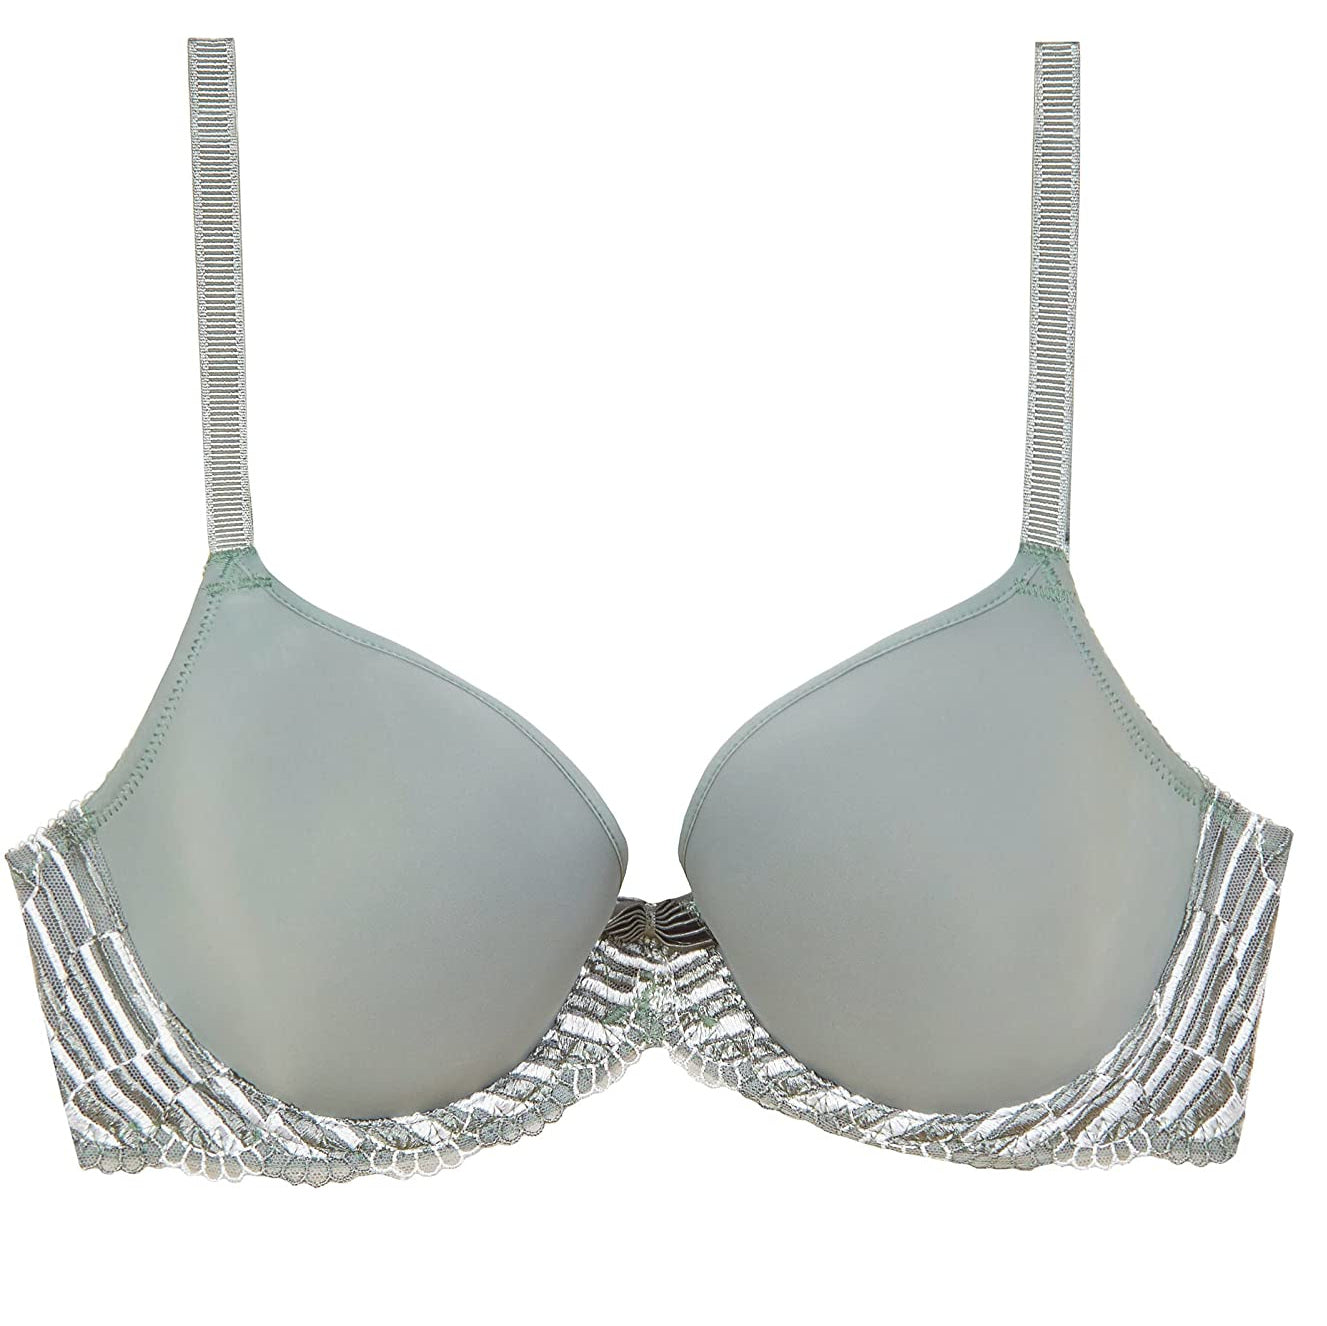 Wacoal Lace Perfection Underwired Bra, Botanical Green, £50.00